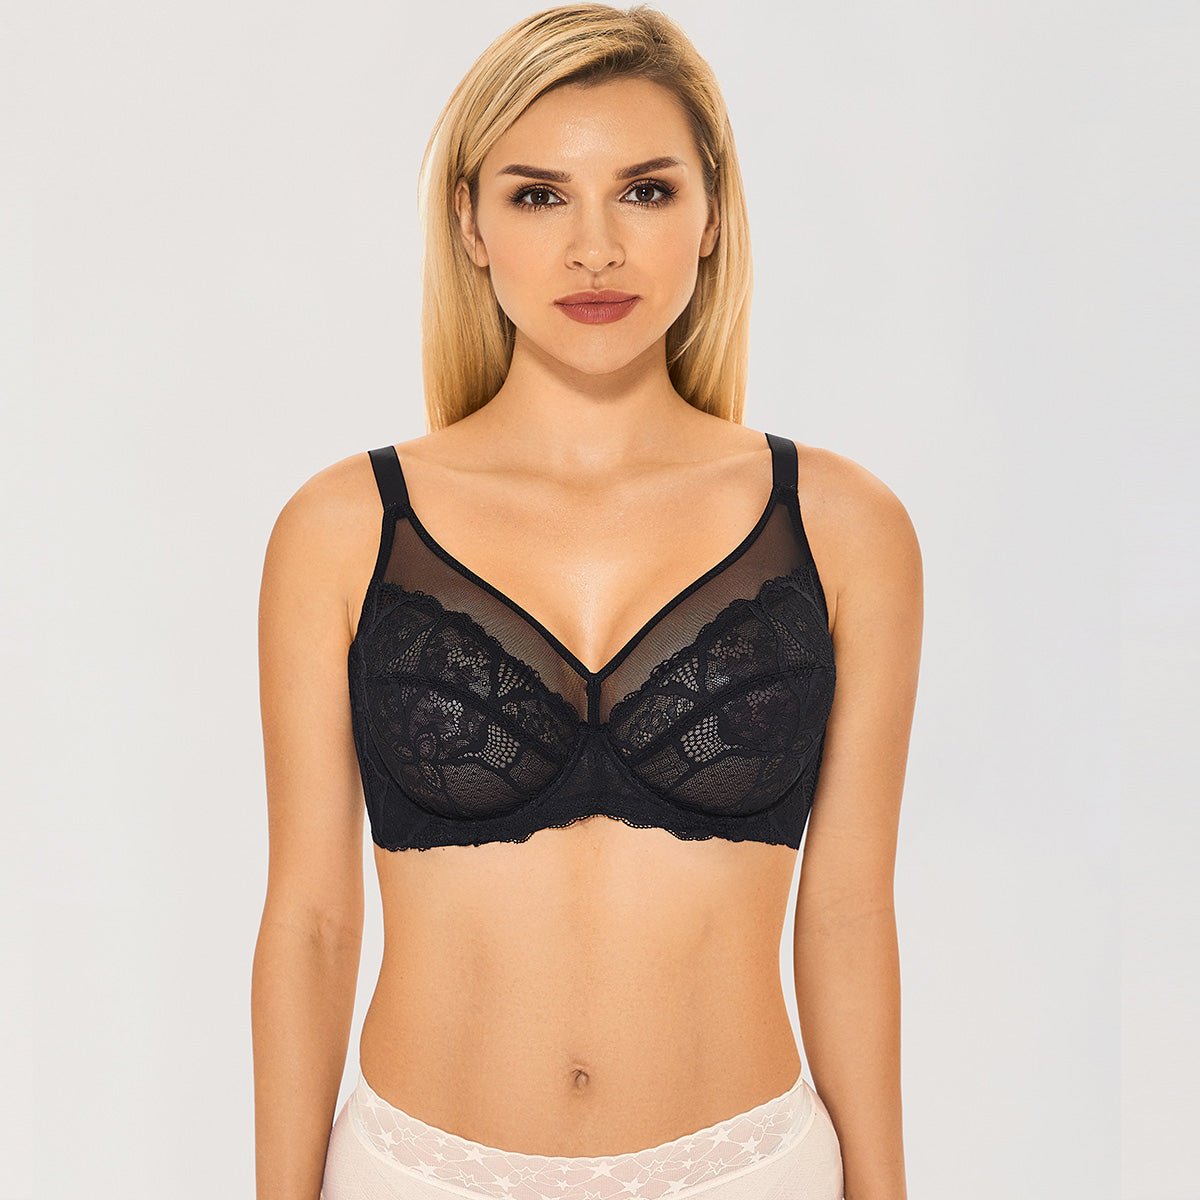 See-through Lace Sheer Unlined Minimizer Underwire Back Closure Black Bra - 0cm